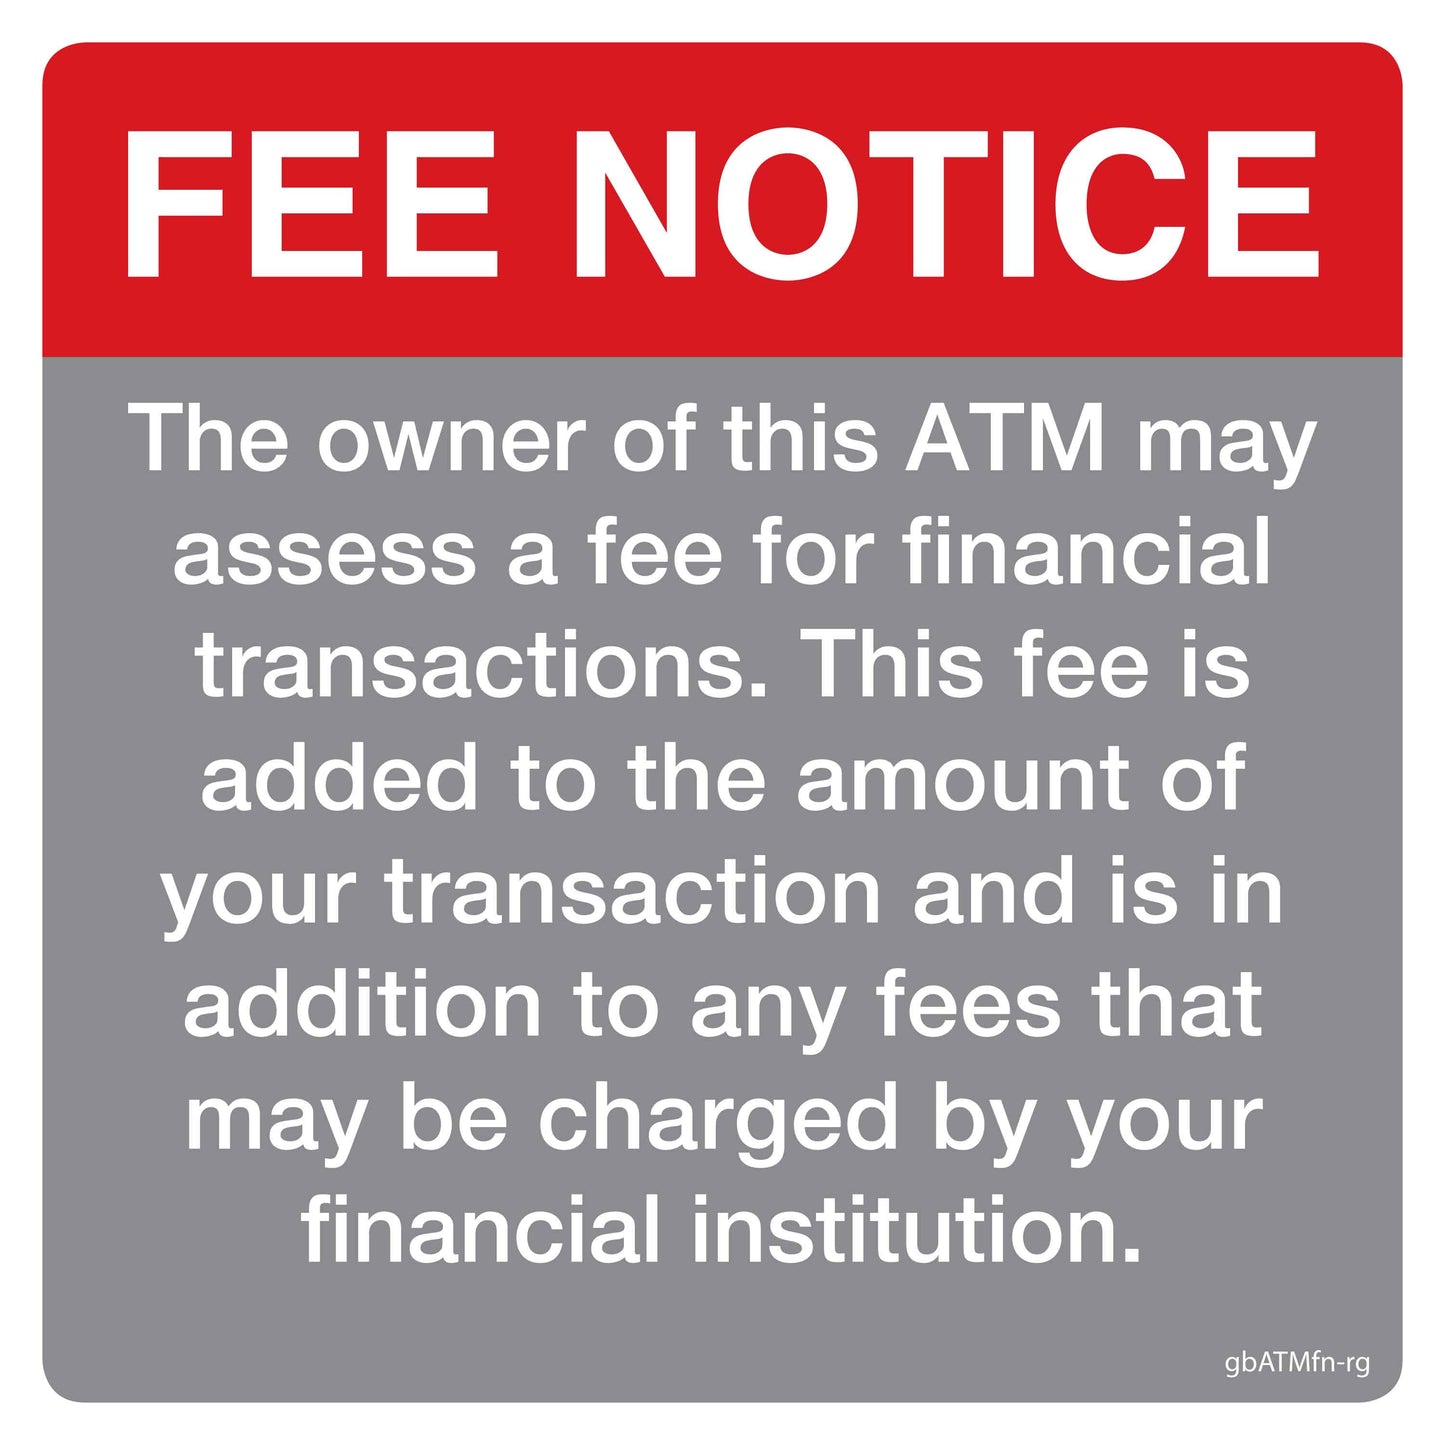 Fee Notice Decal, Red and Gray - 4 inches by 4 inches in size. 